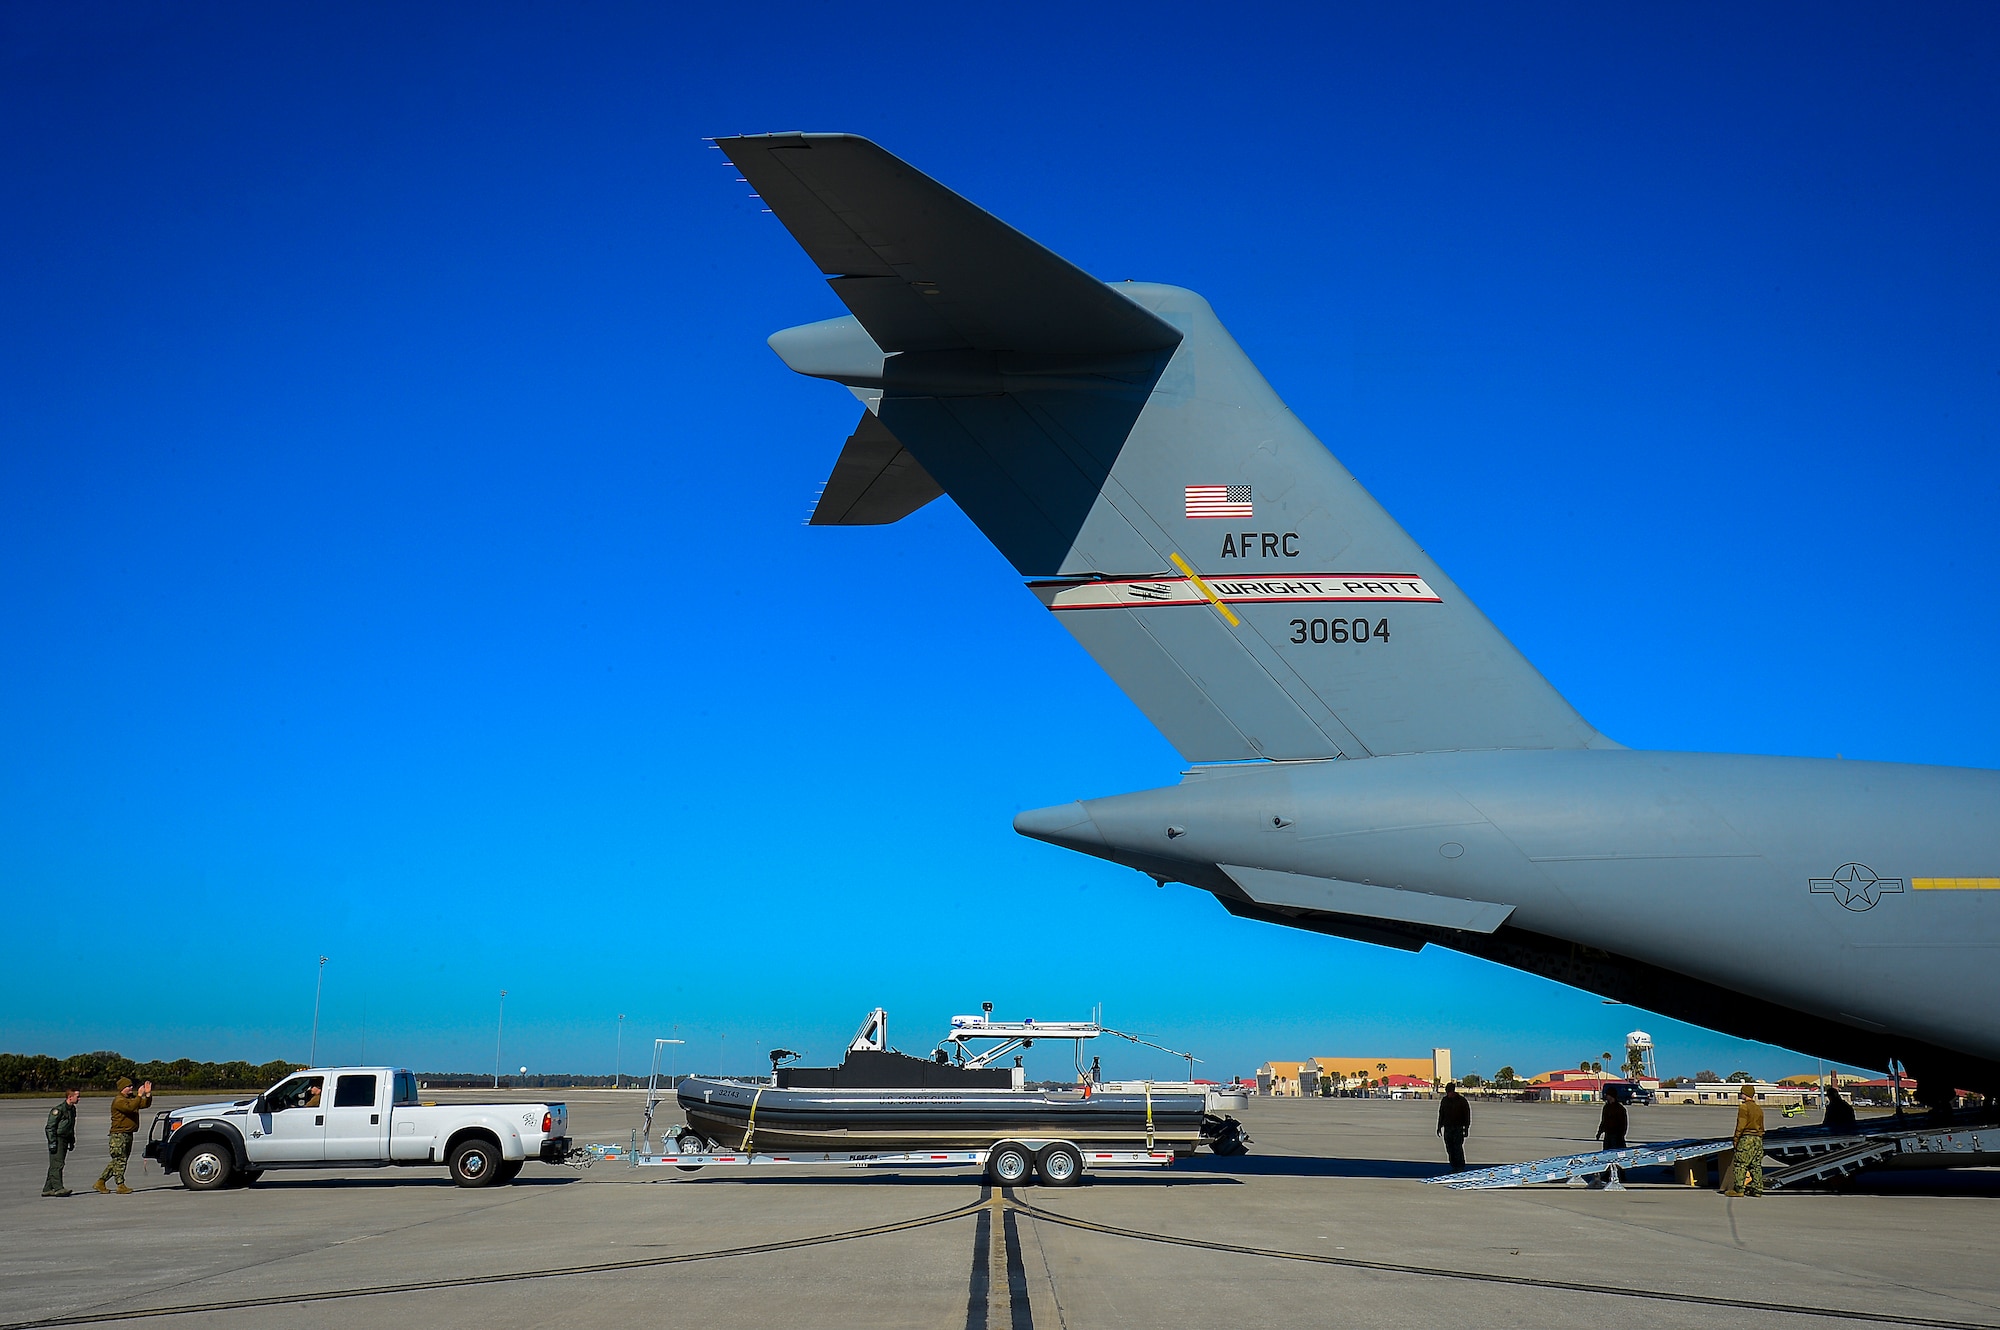 A Coast Guard 32-foot transportable port security boat is loaded into a C-17 Globemaster III at MacDill Air Force Base, Fla., Feb. 20, 2015. The 6th Air Mobility Wing hosted two Coast Guard exercises for the Port Security Unit 309 from Feb. 18 through March 1, 2015. (U.S. Air Force photo by Senior Airman Ned T. Johnston/Released)